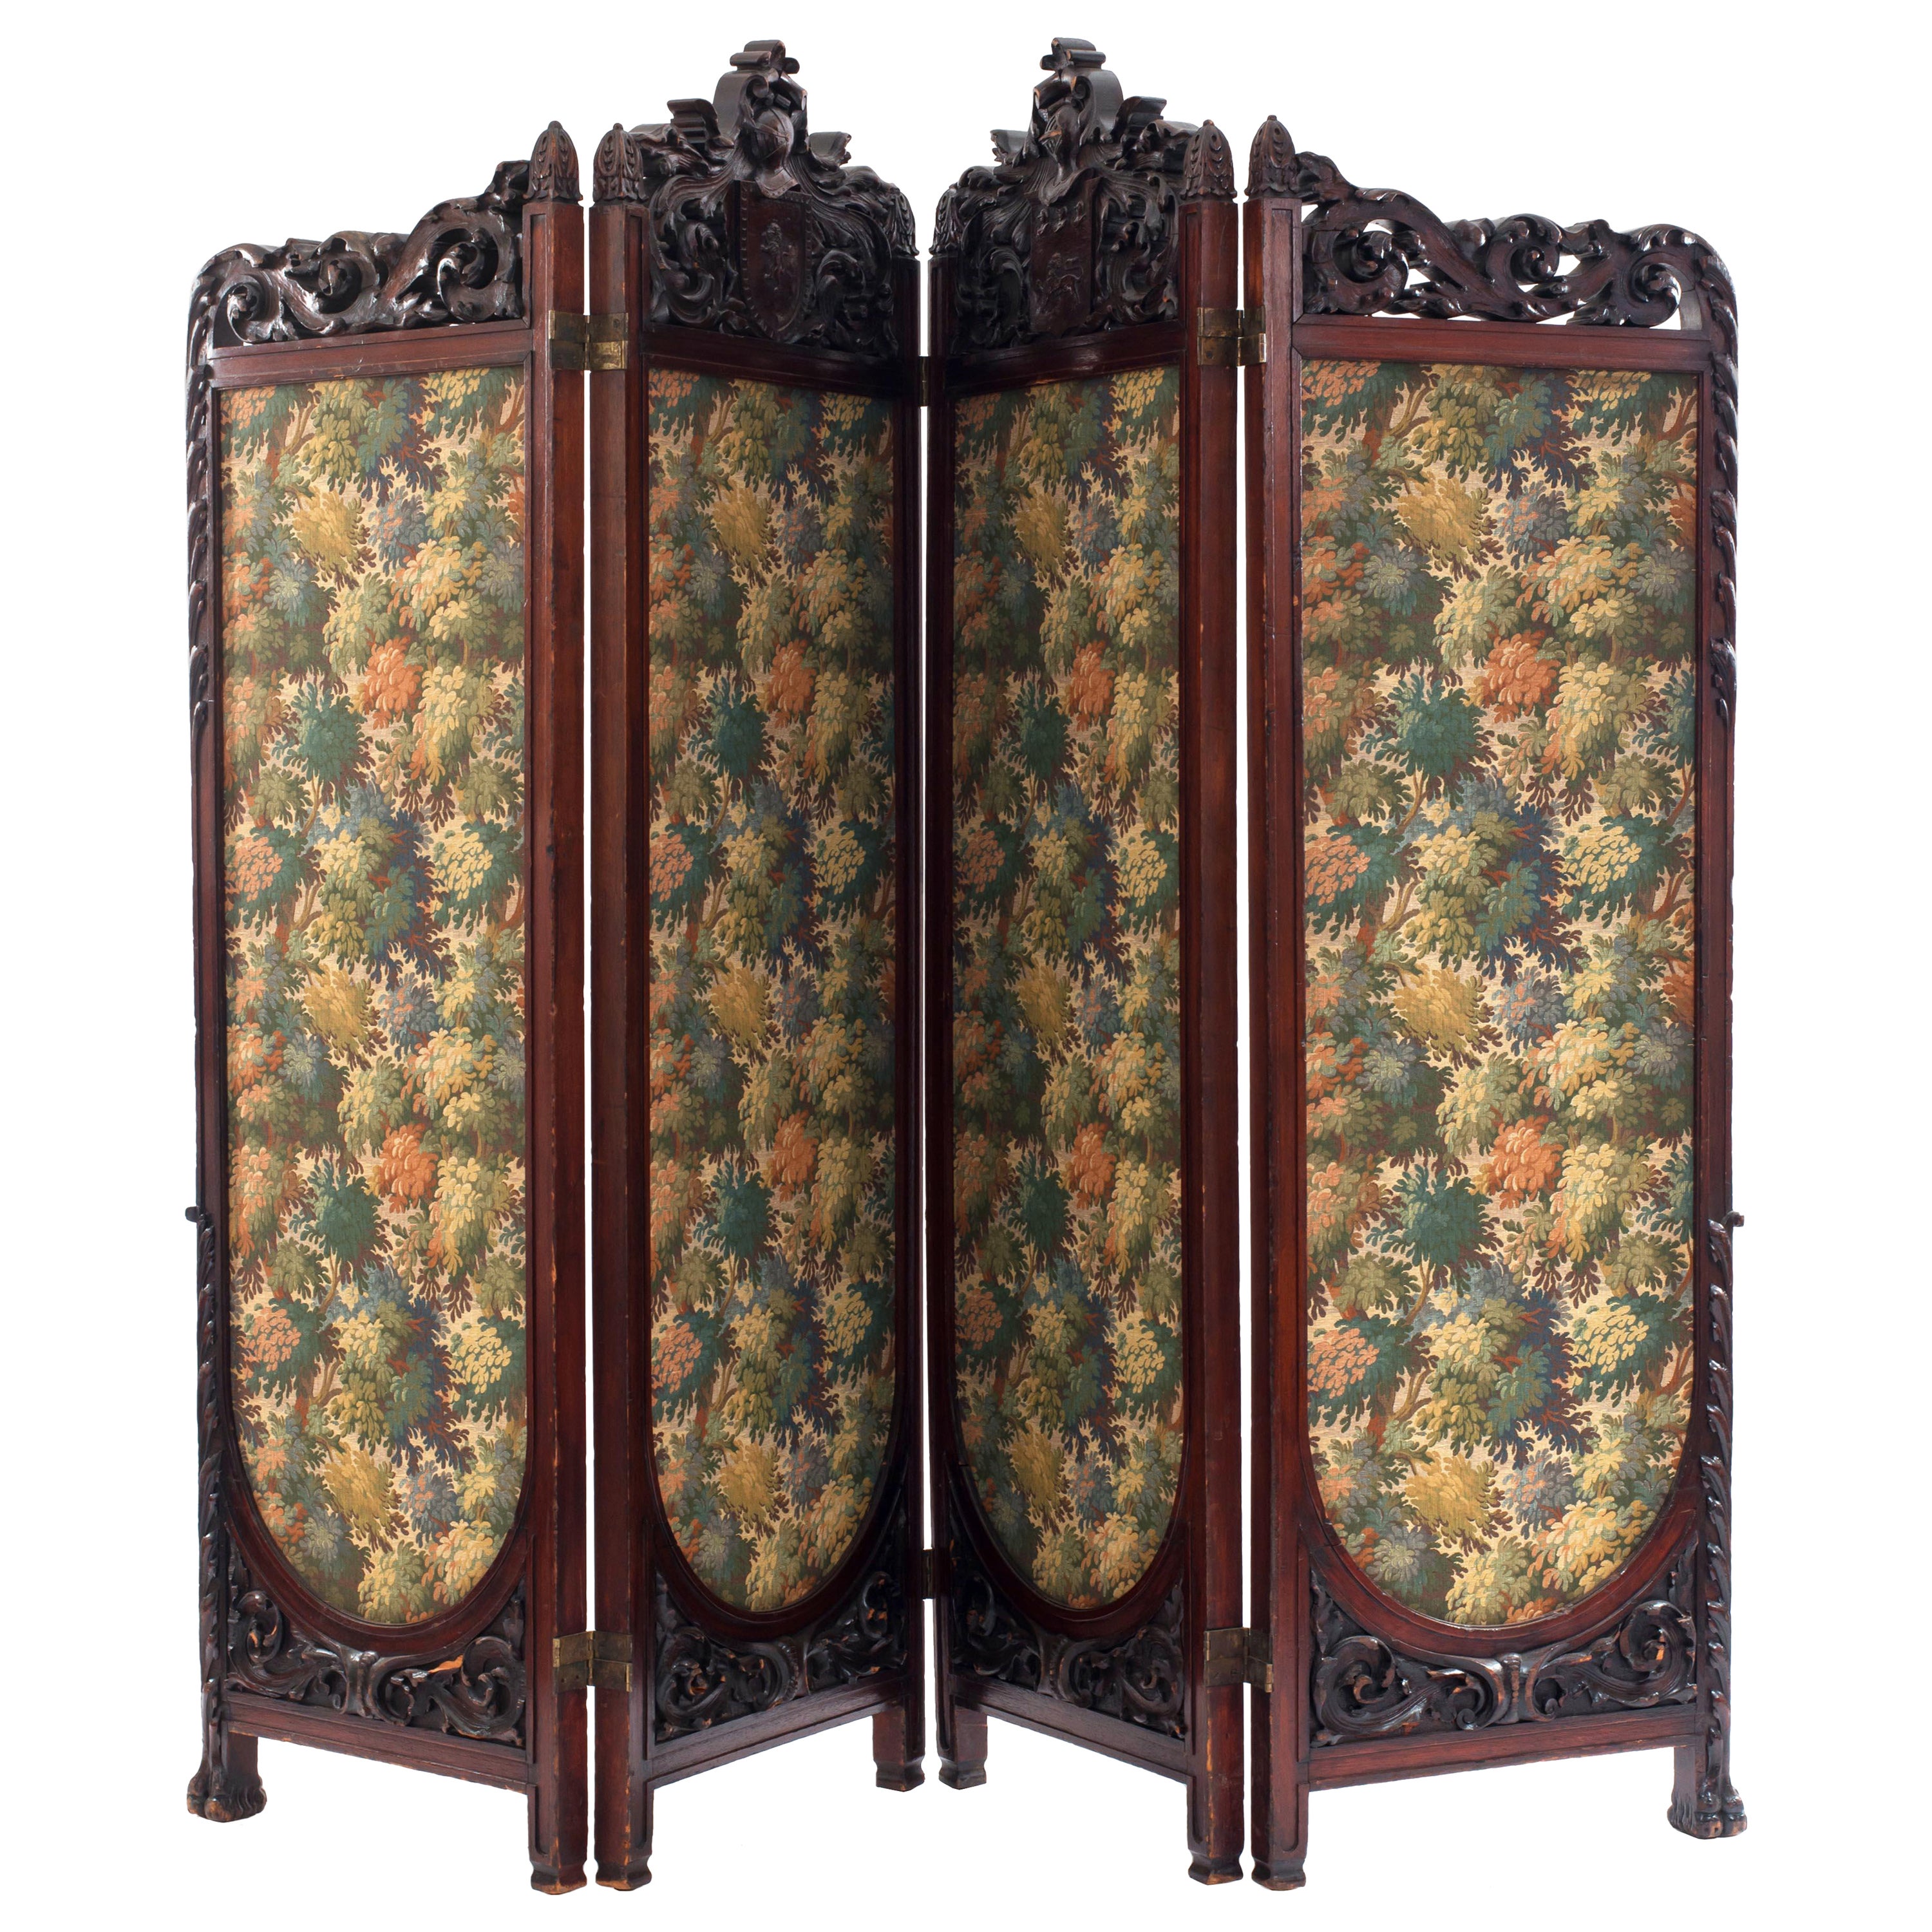 English Victorian Carved Mahogany 4-Fold Screen with Tapestry Panels